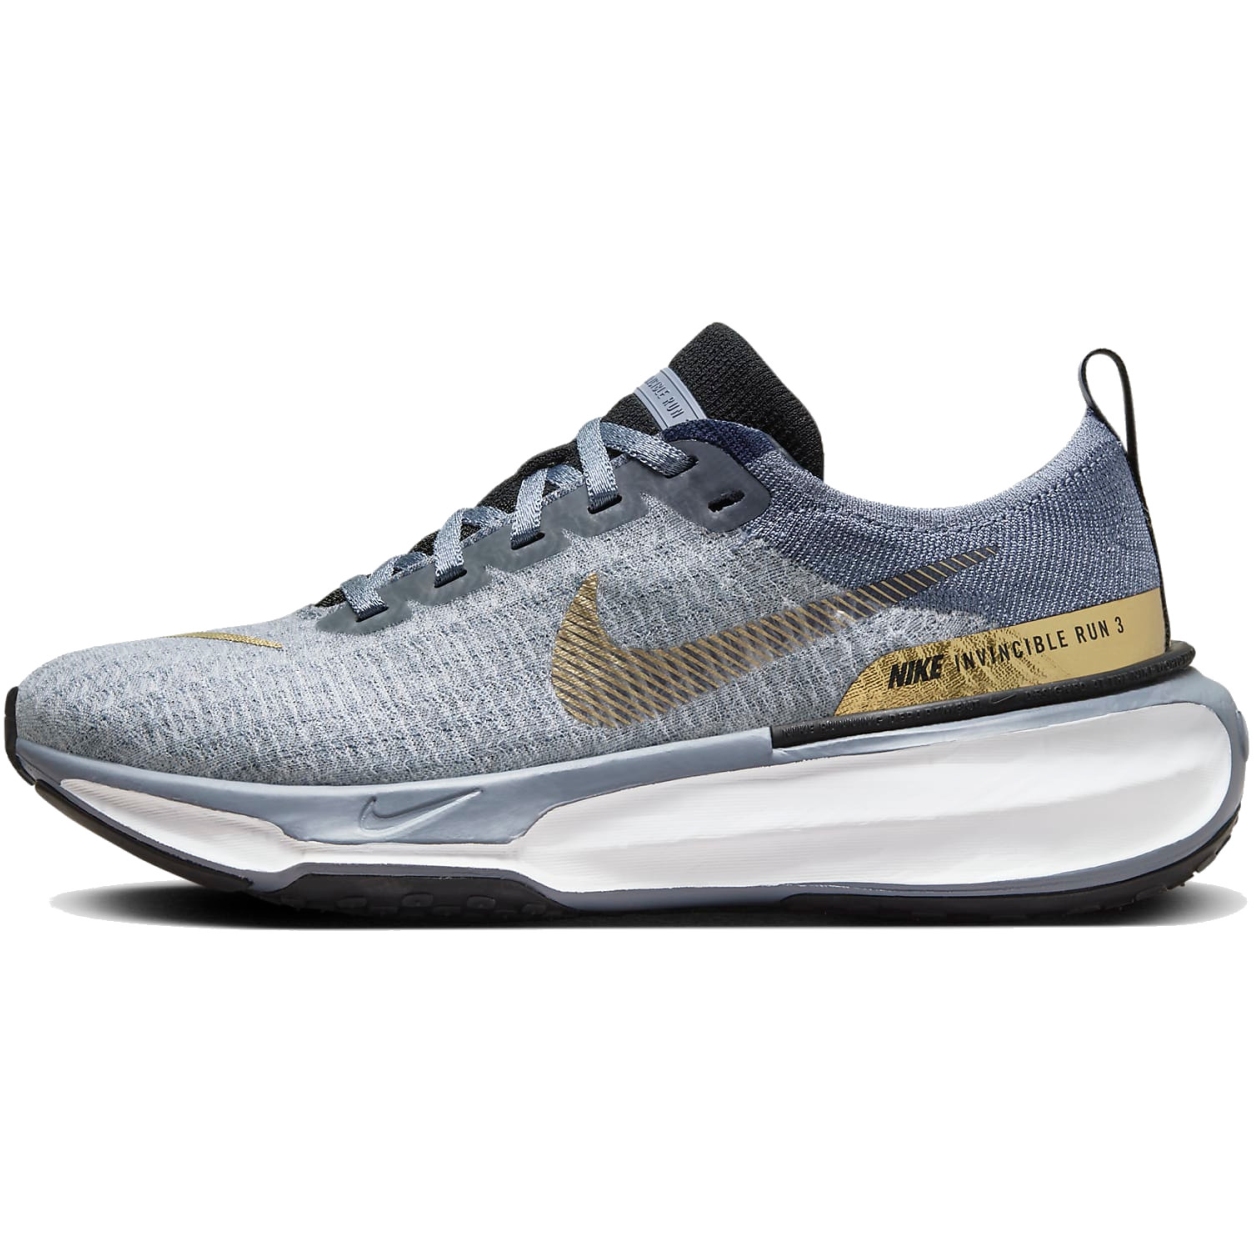 Picture of Nike Invincible 3 Running Shoes Women - ashen slate/diffused blue/football grey/metallic gold DR2660-400